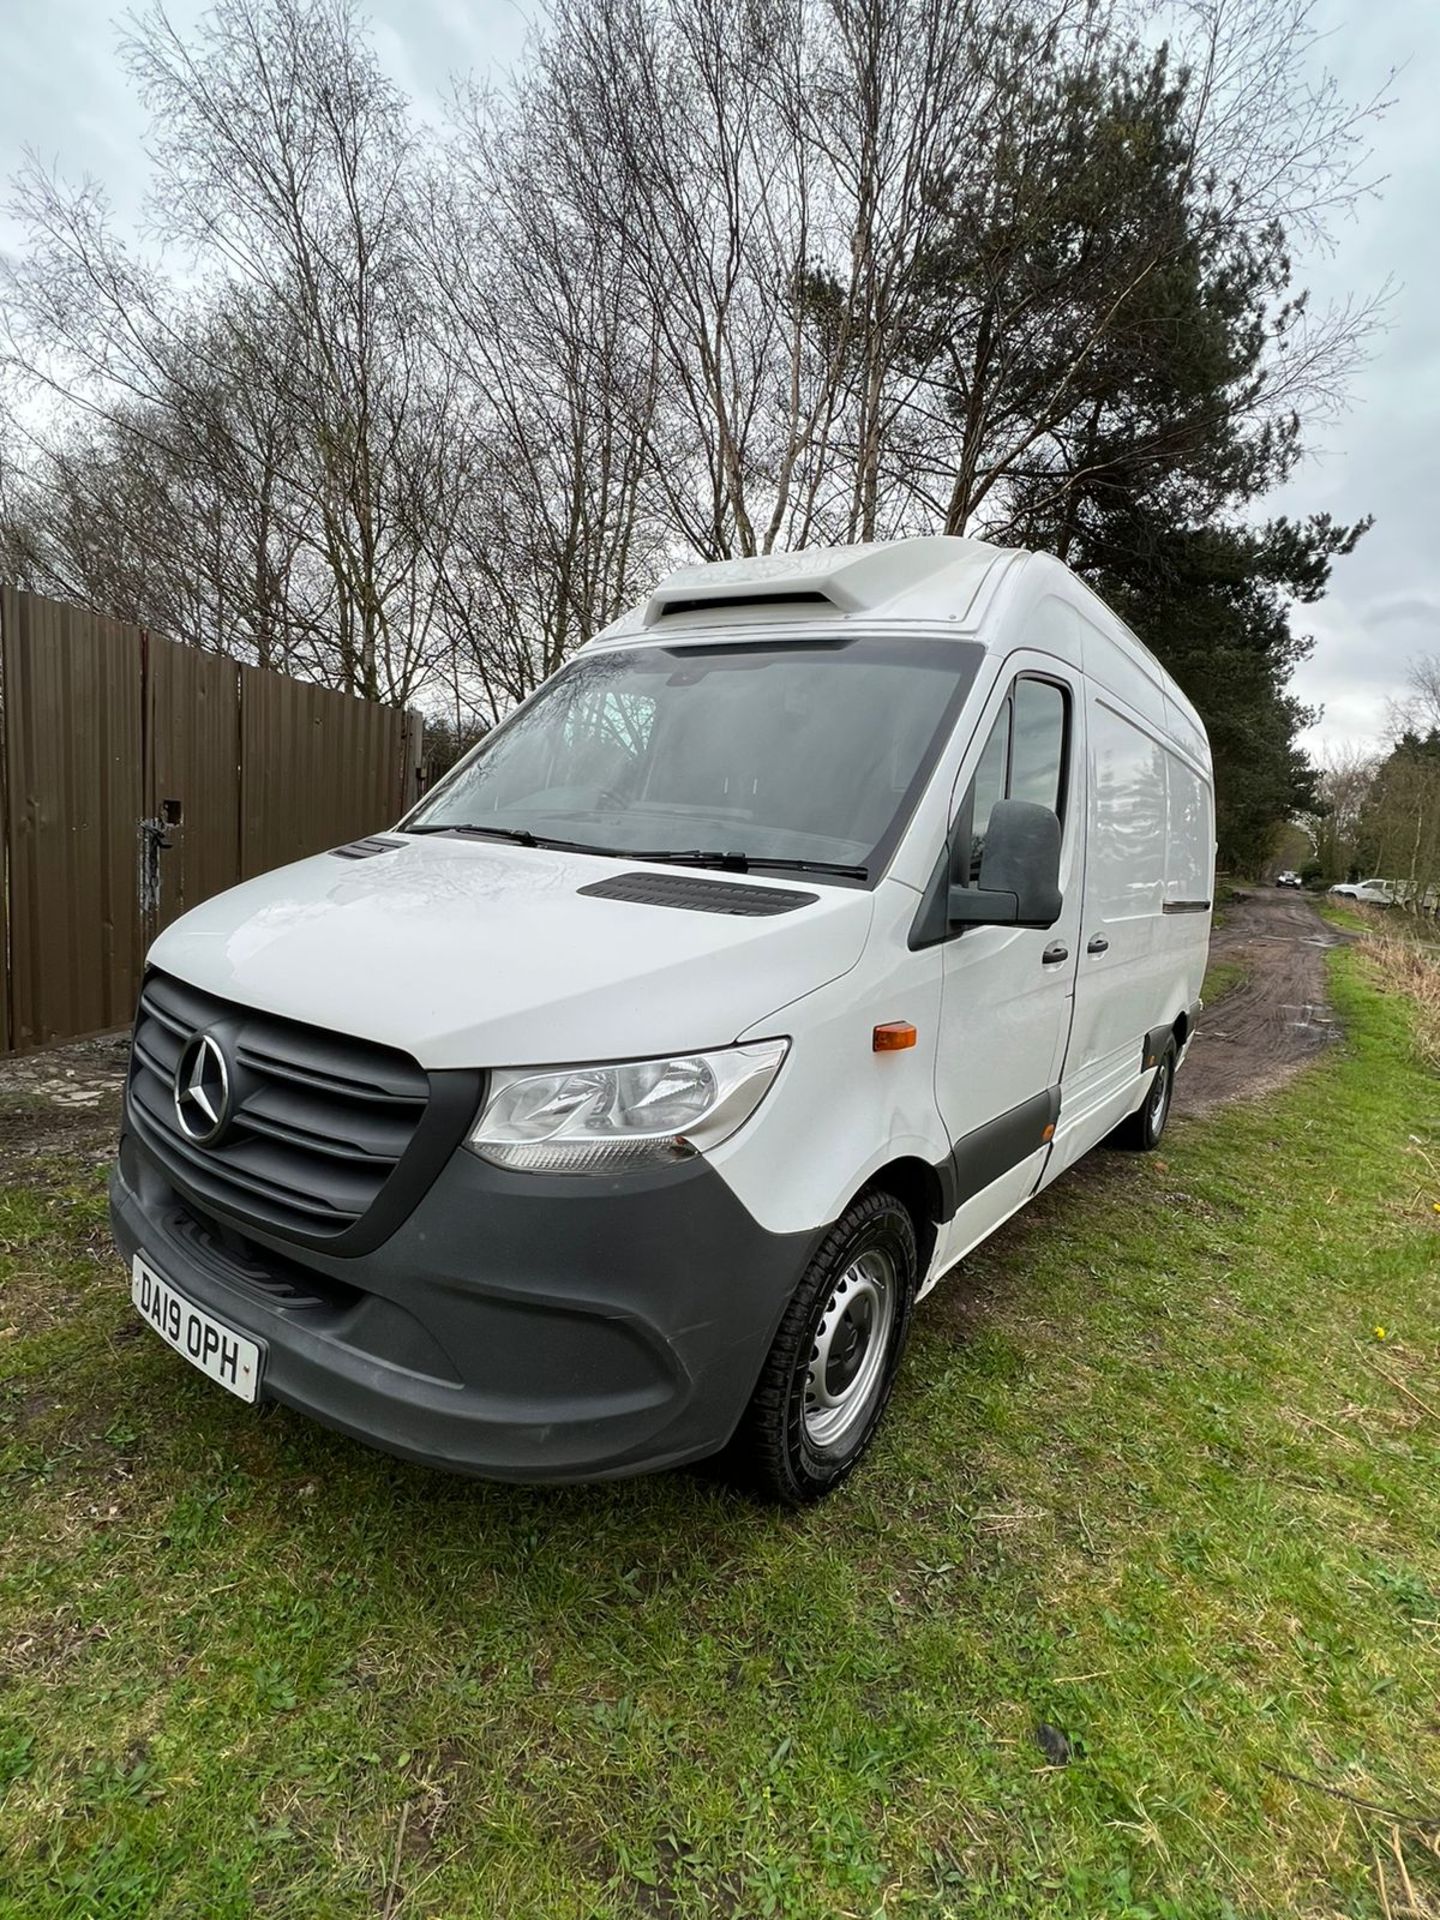 MERCEDES SPRINTER 314CDI AIR CONDITIONING - Image 12 of 22